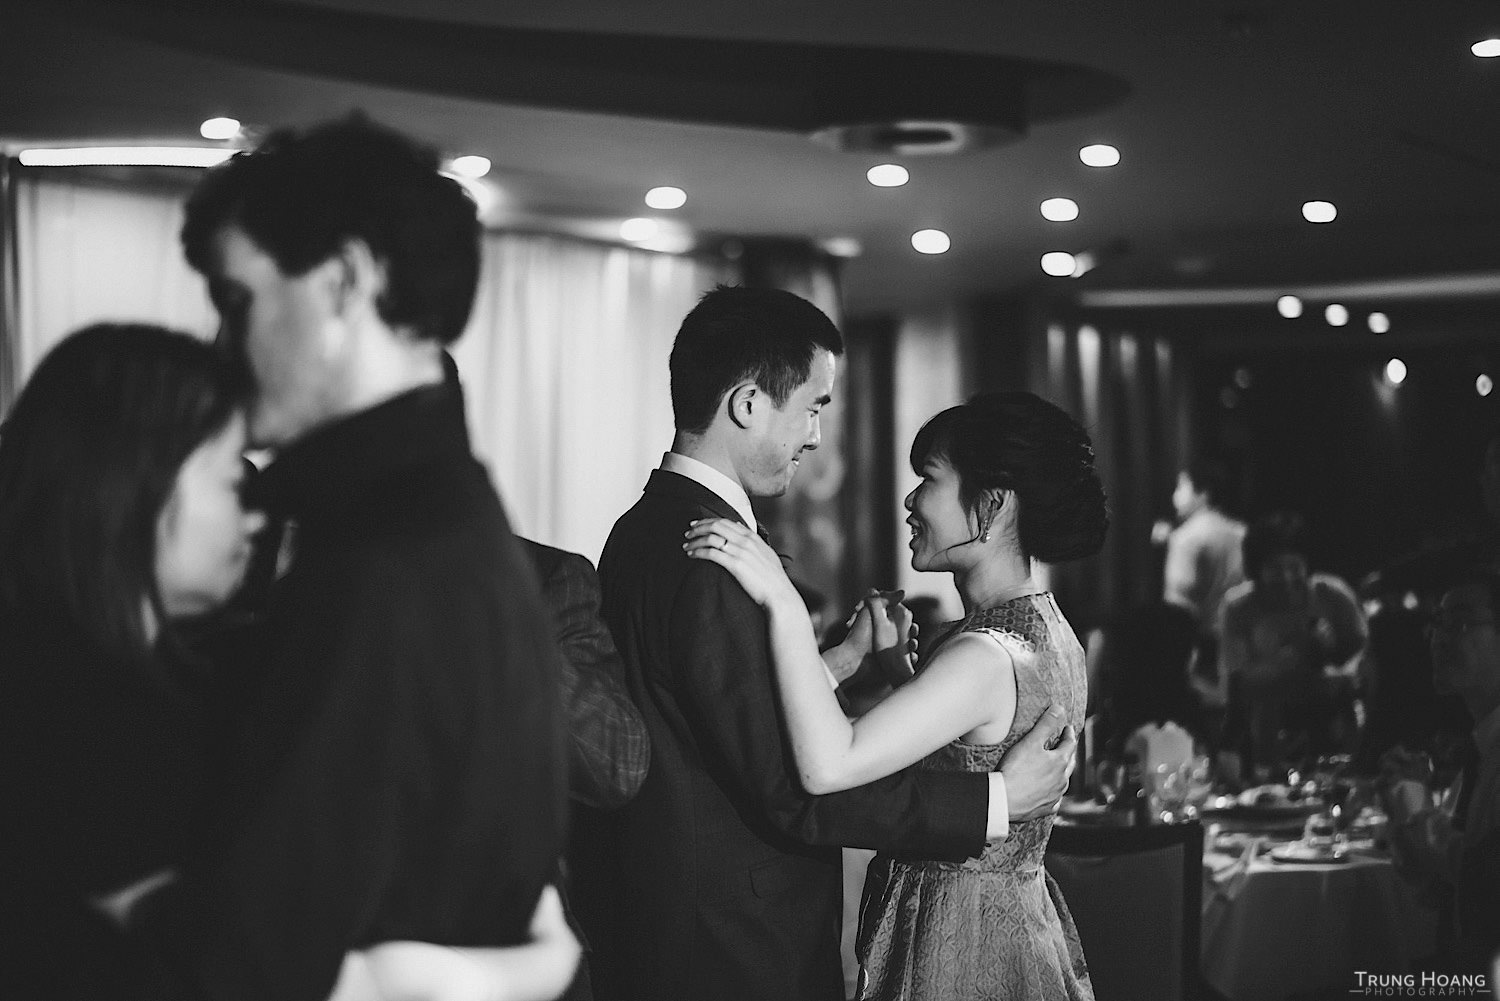  Photo by Trung Hoang Photography |www.trunghoangphotography.com | San Francisco Bay Area Wedding Photographer 